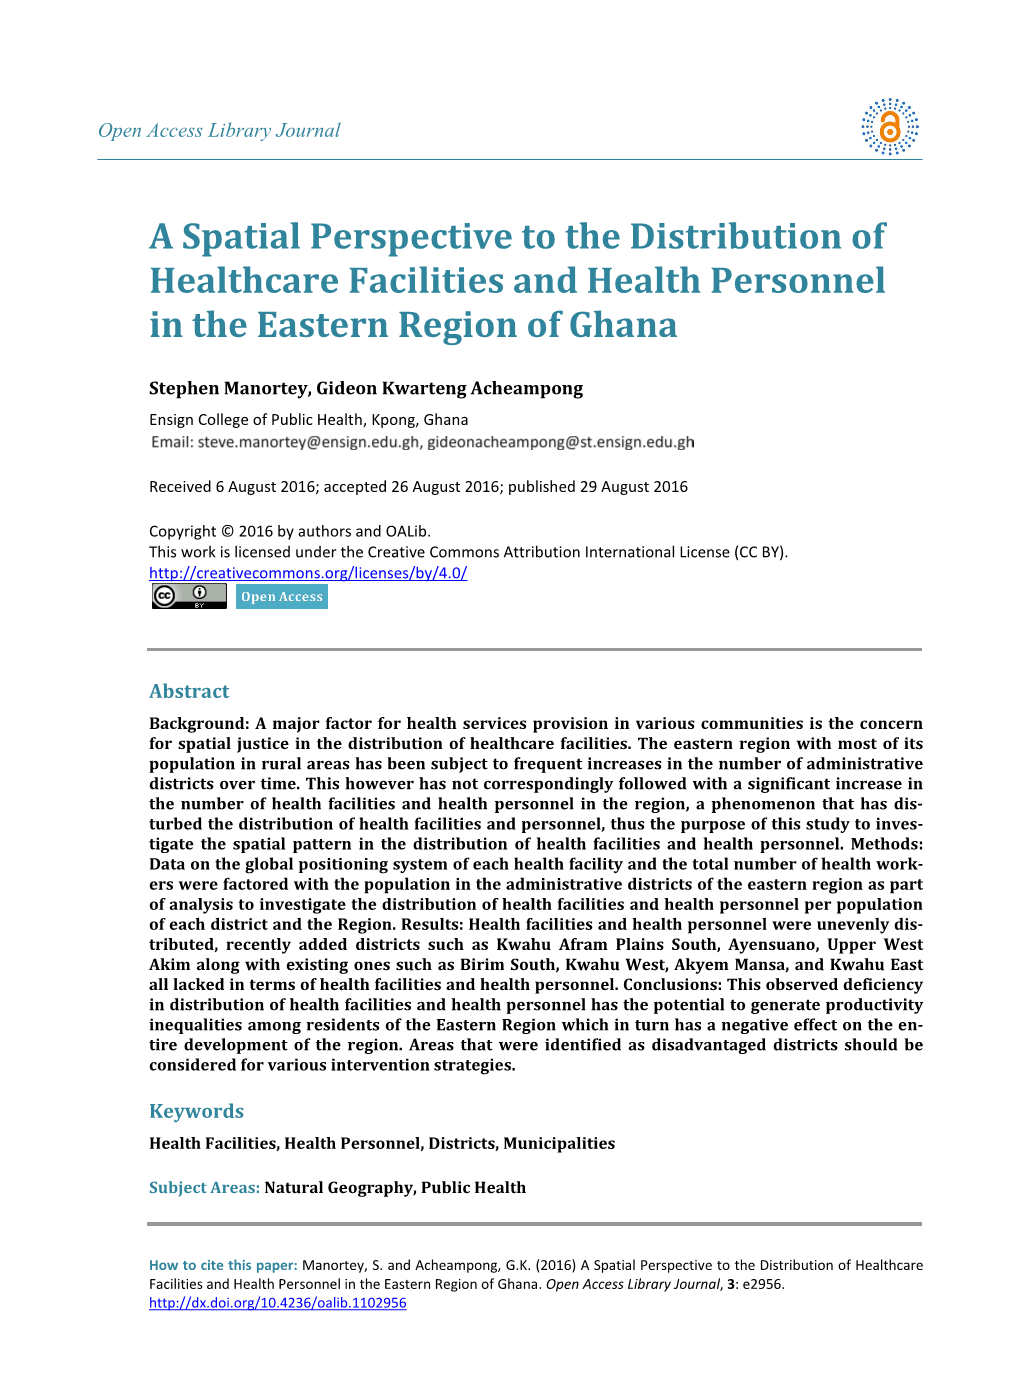 A Spatial Perspective to the Distribution of Healthcare Facilities and Health Personnel in the Eastern Region of Ghana